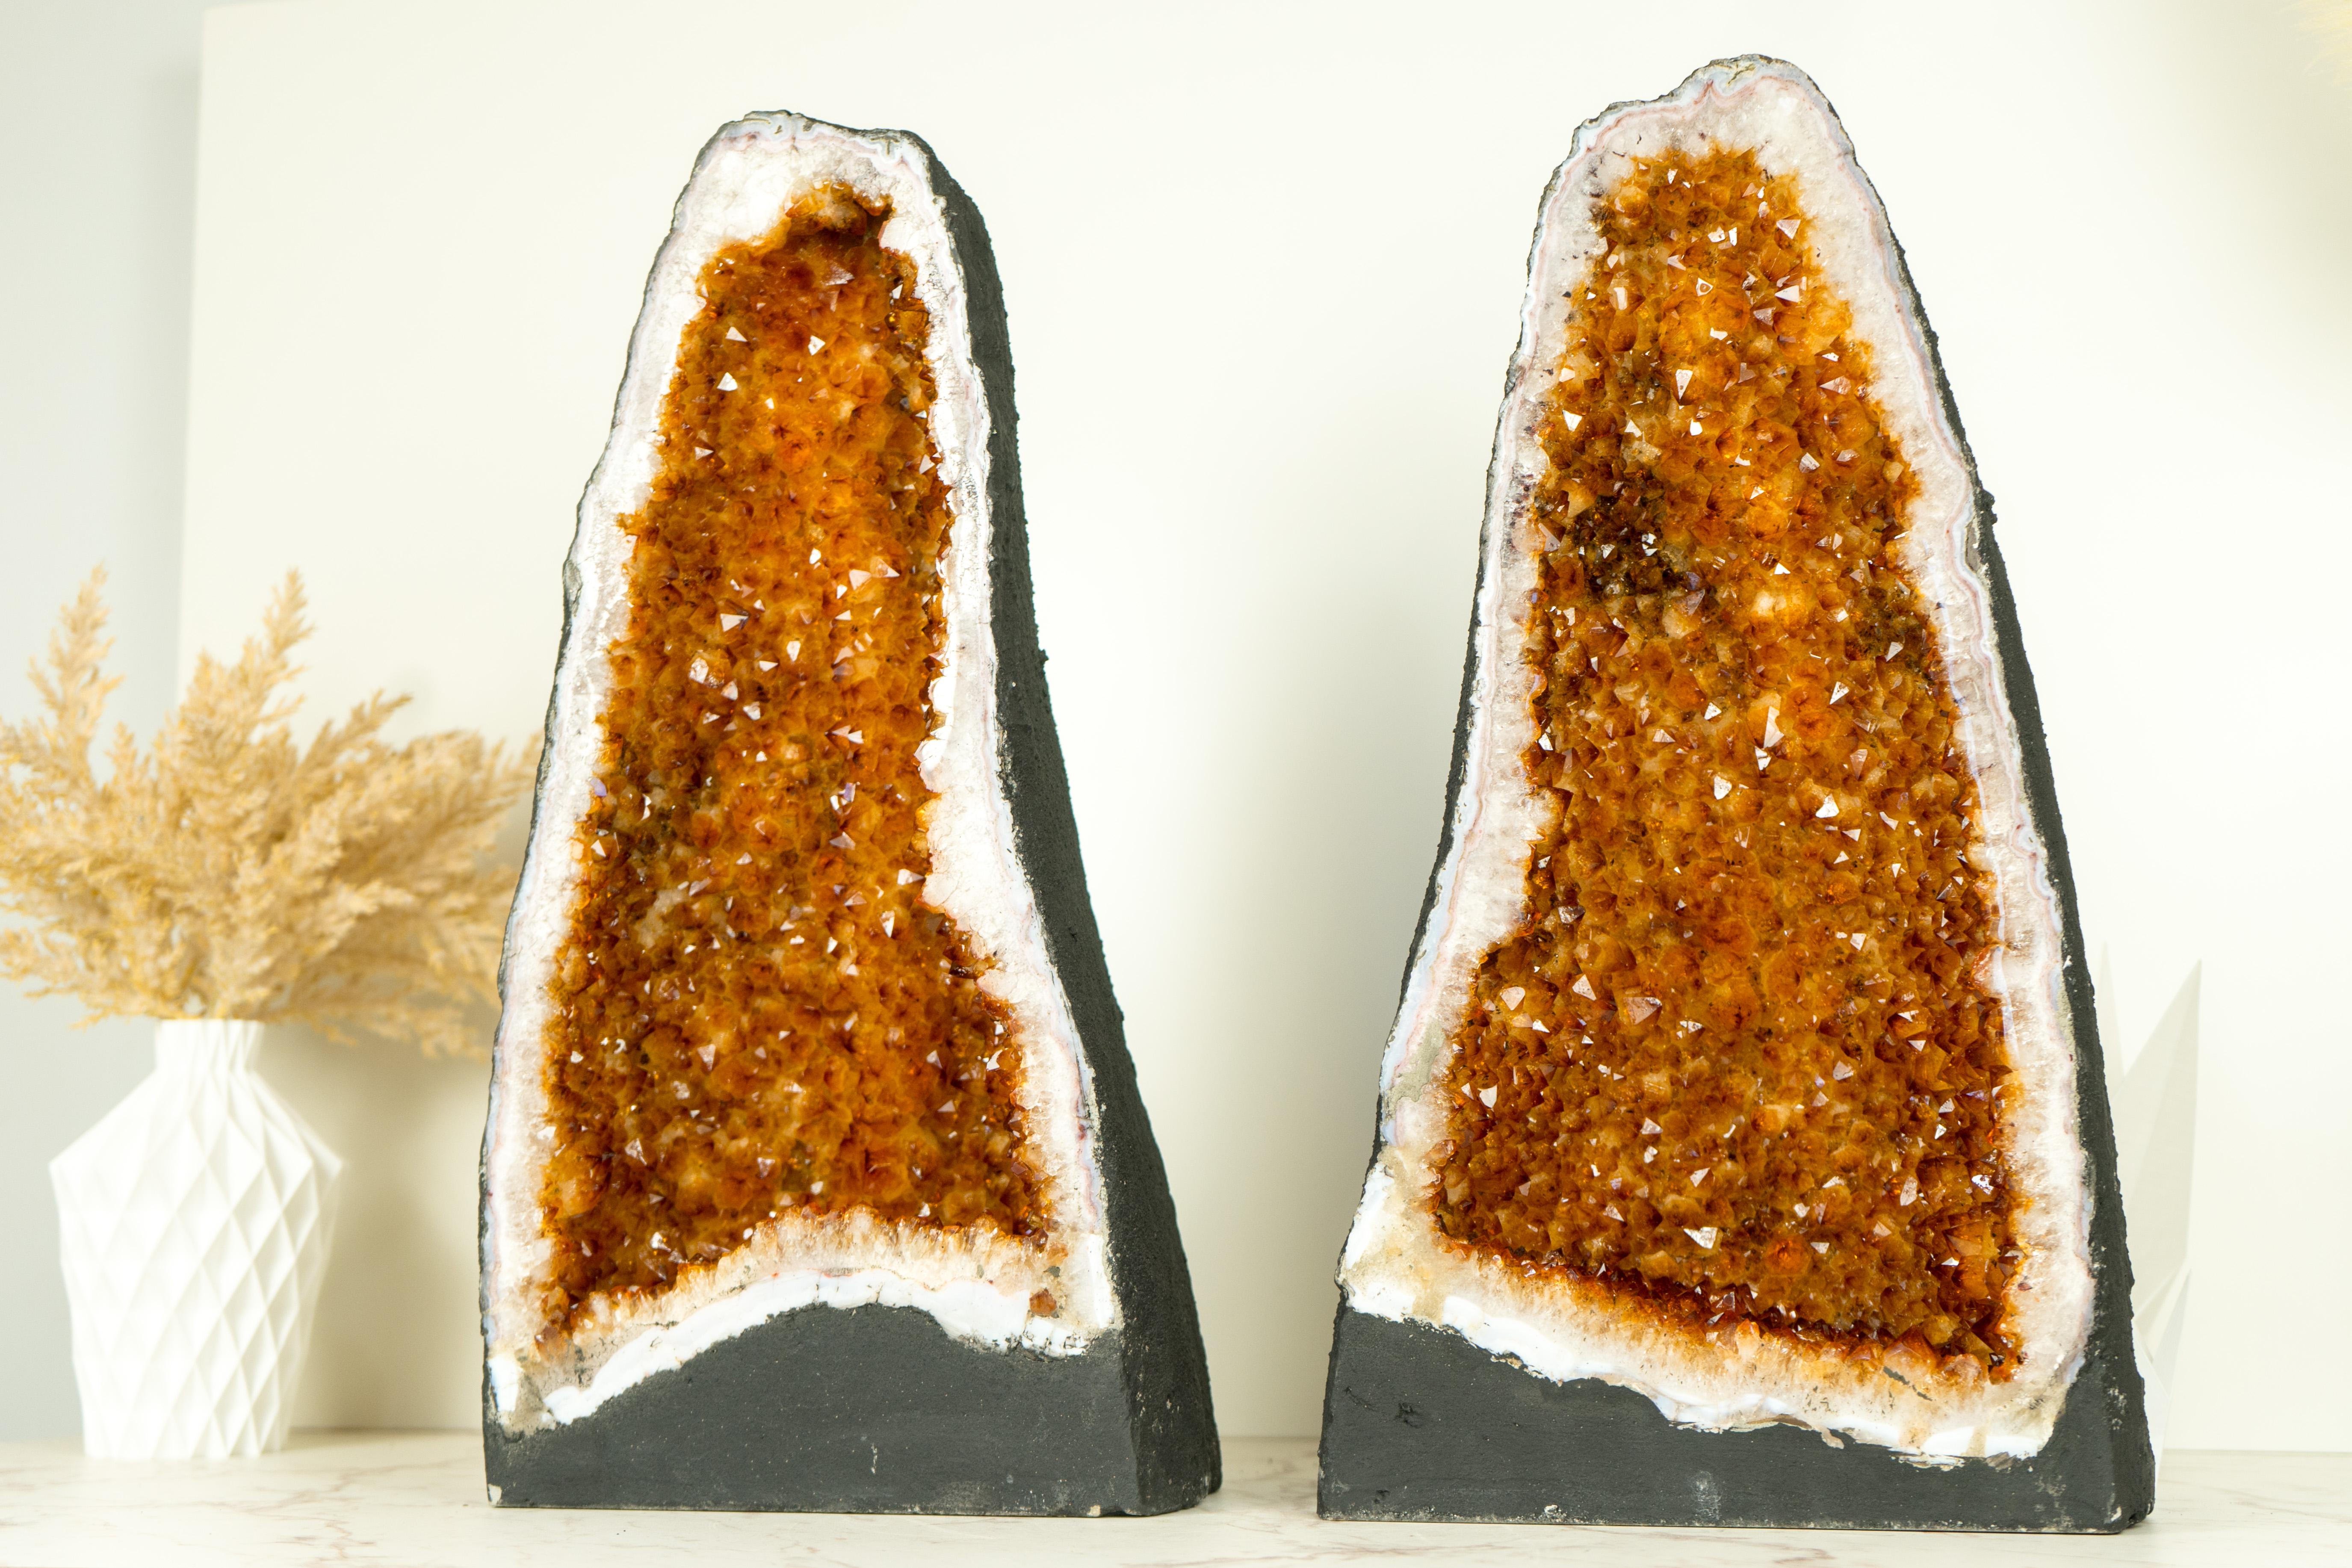 Amethyst Pair of Citrine Geode Cathedrals with Sparkling AAA-Grade, Rich Orange Druzy